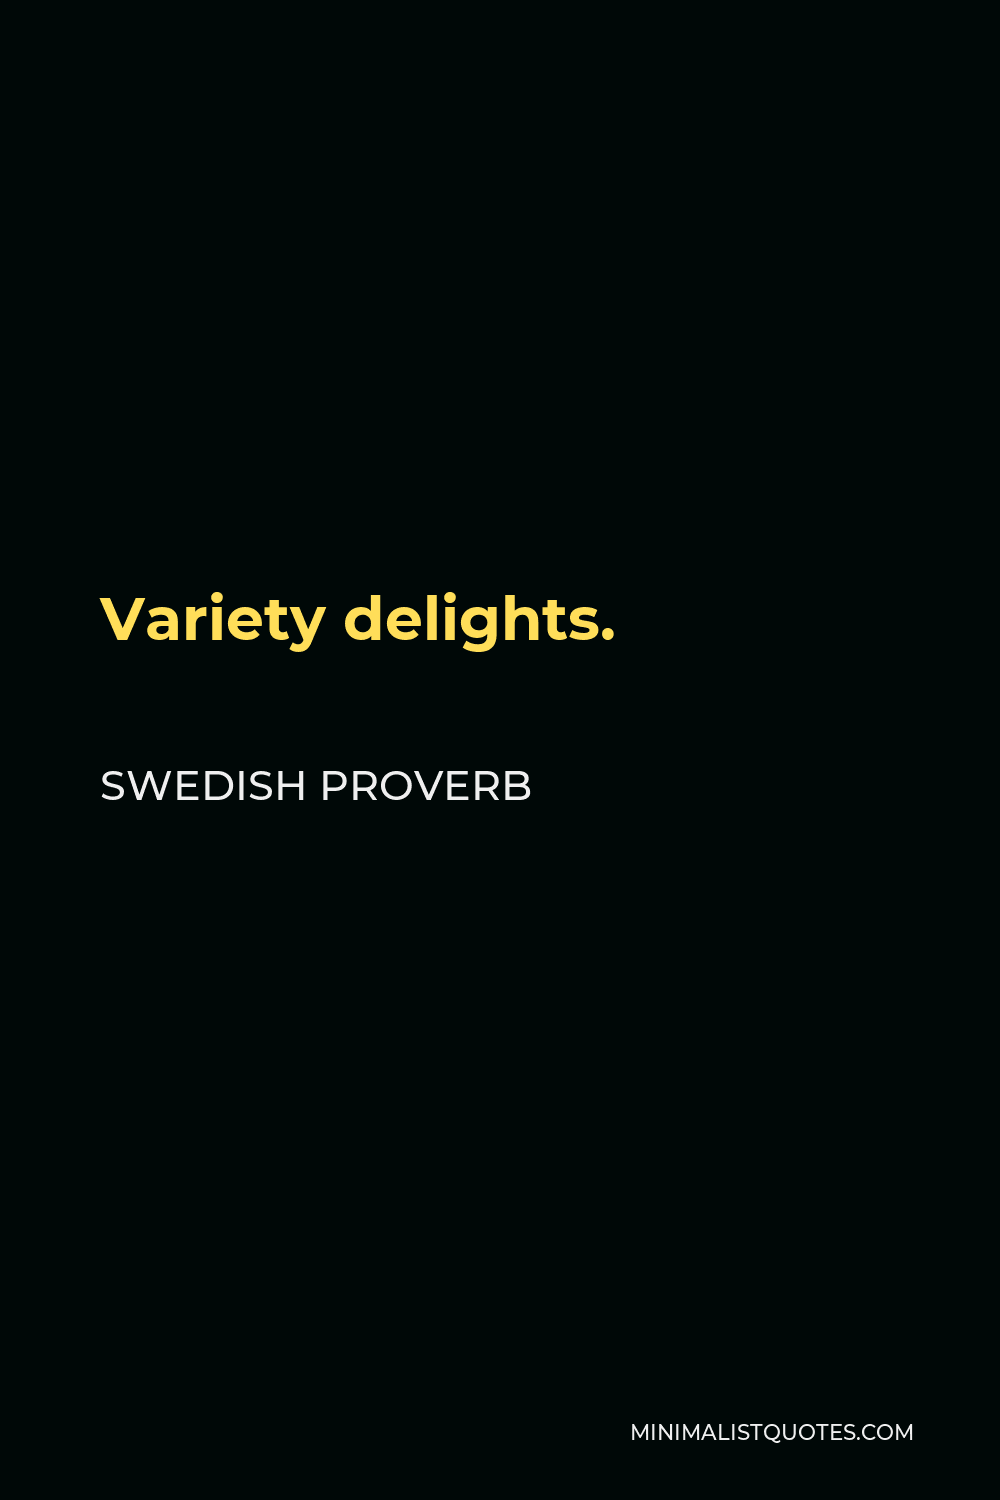 Swedish Proverb Quote - Variety delights.